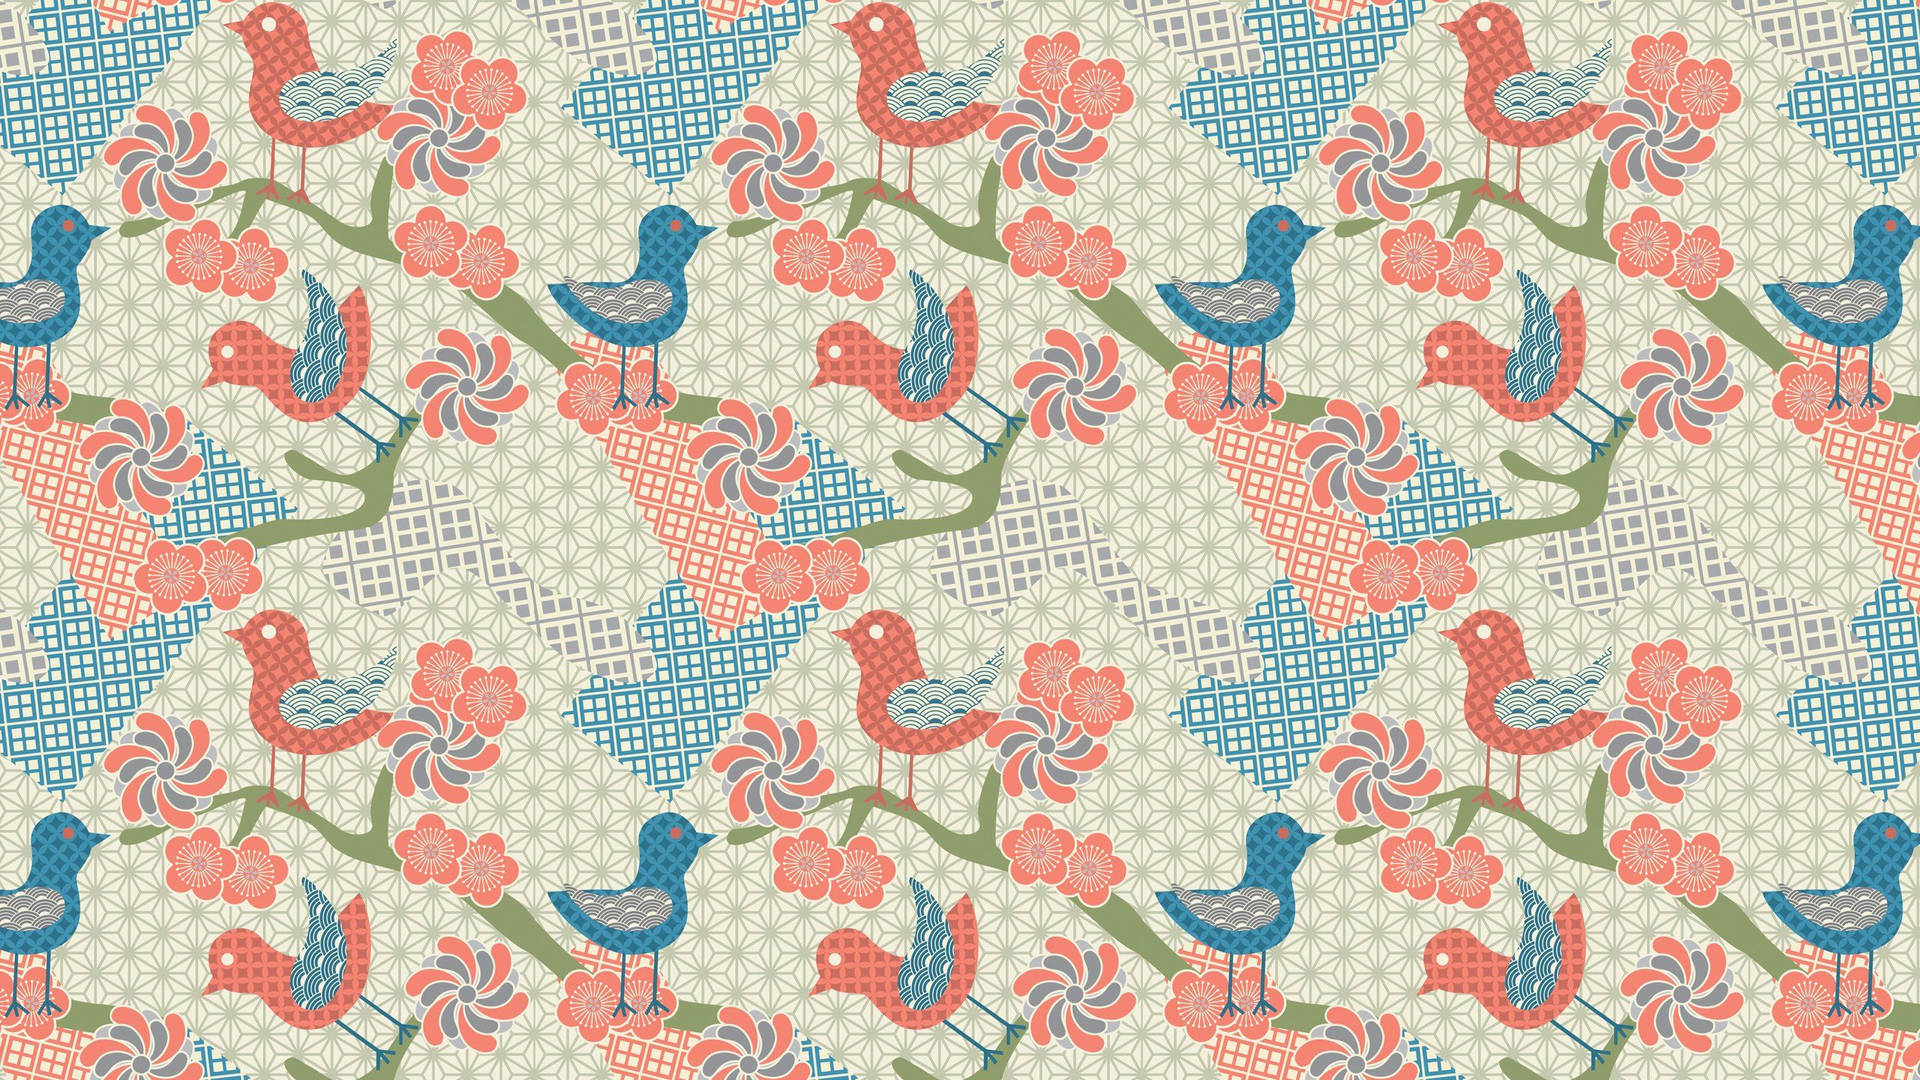 Bird Illustration With Different Color Pattern Wallpaper